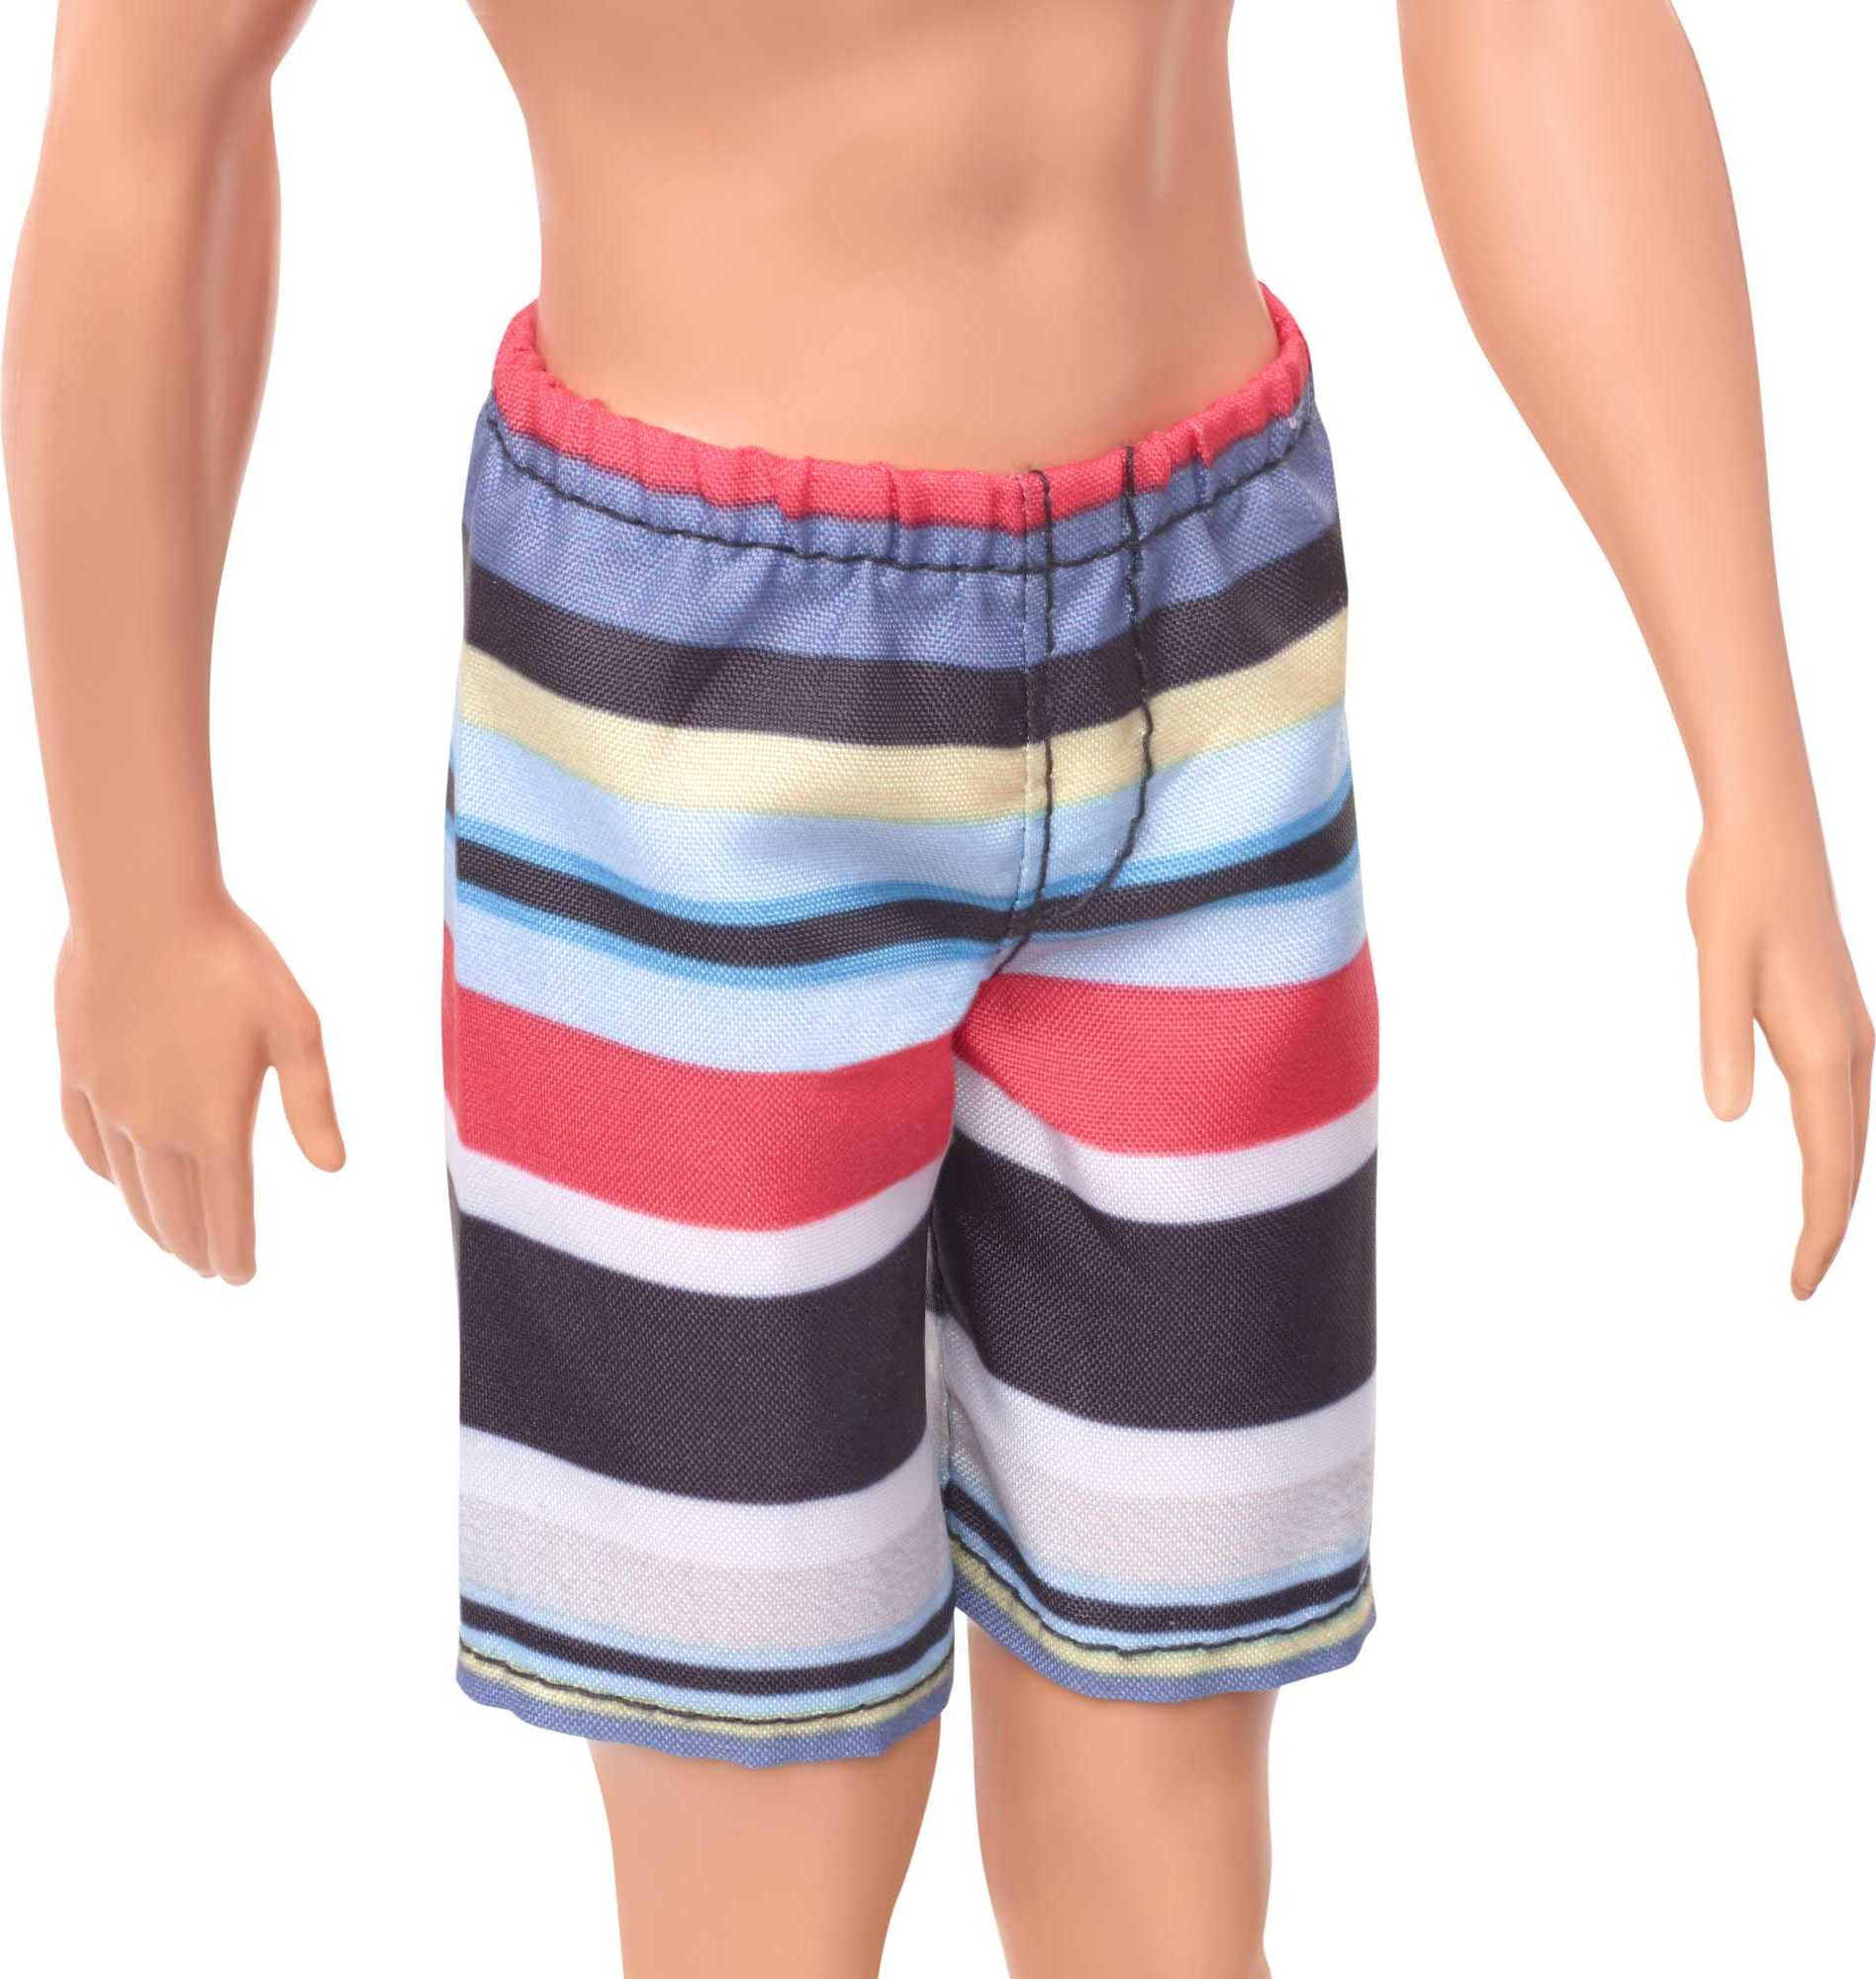 Barbie Ken Beach Doll with Blonde Hair & Striped Swimsuit - image 2 of 5